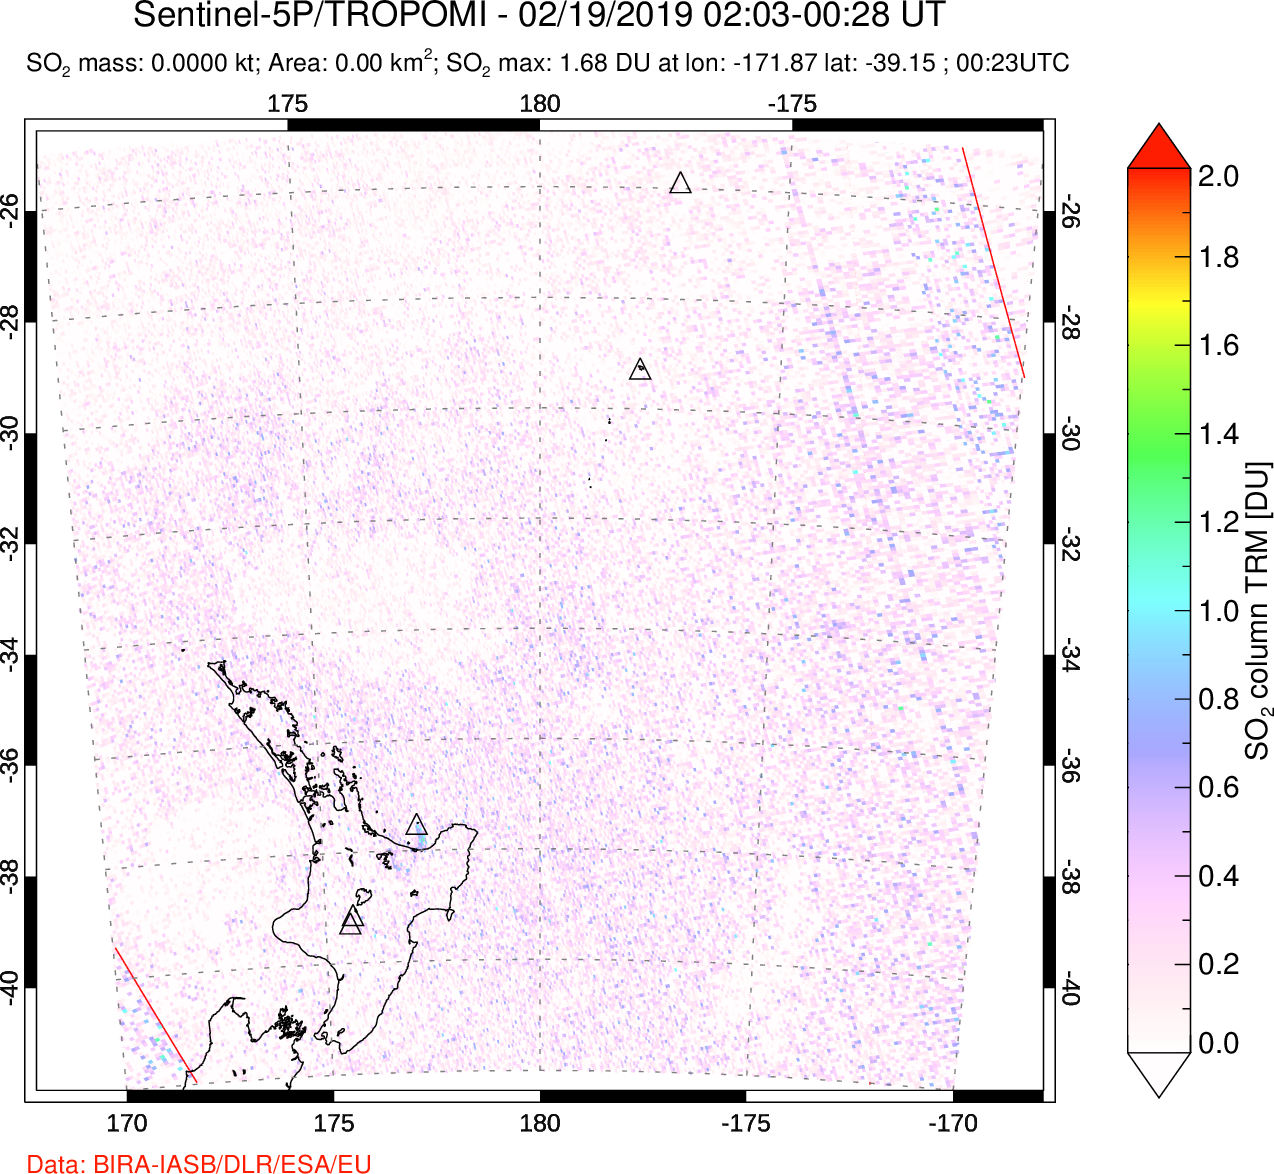 A sulfur dioxide image over New Zealand on Feb 19, 2019.